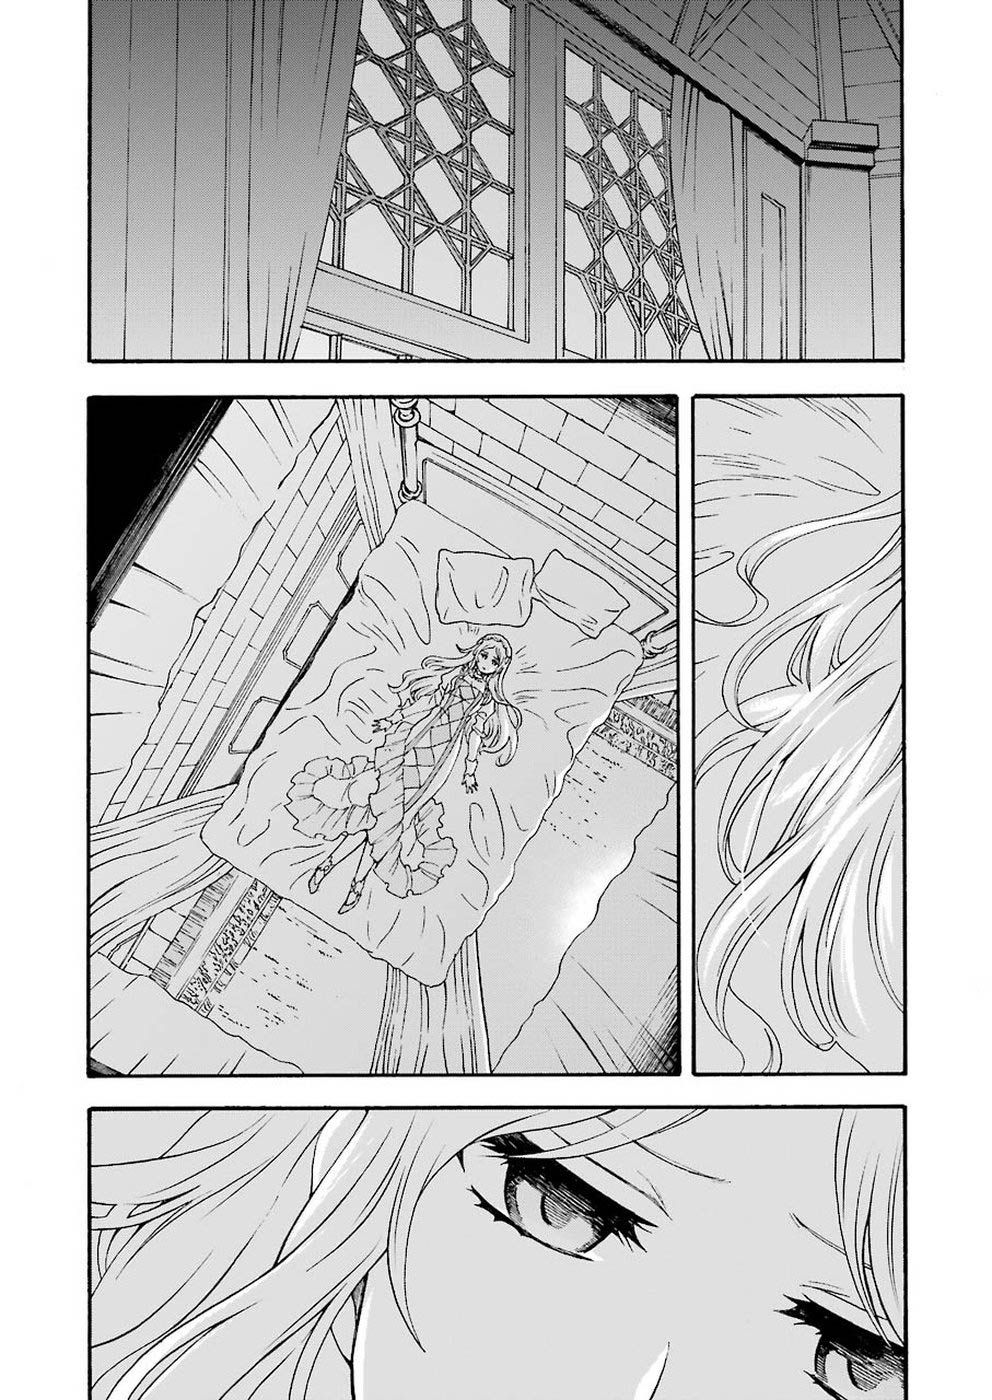 Knights and Magic Chapter 66